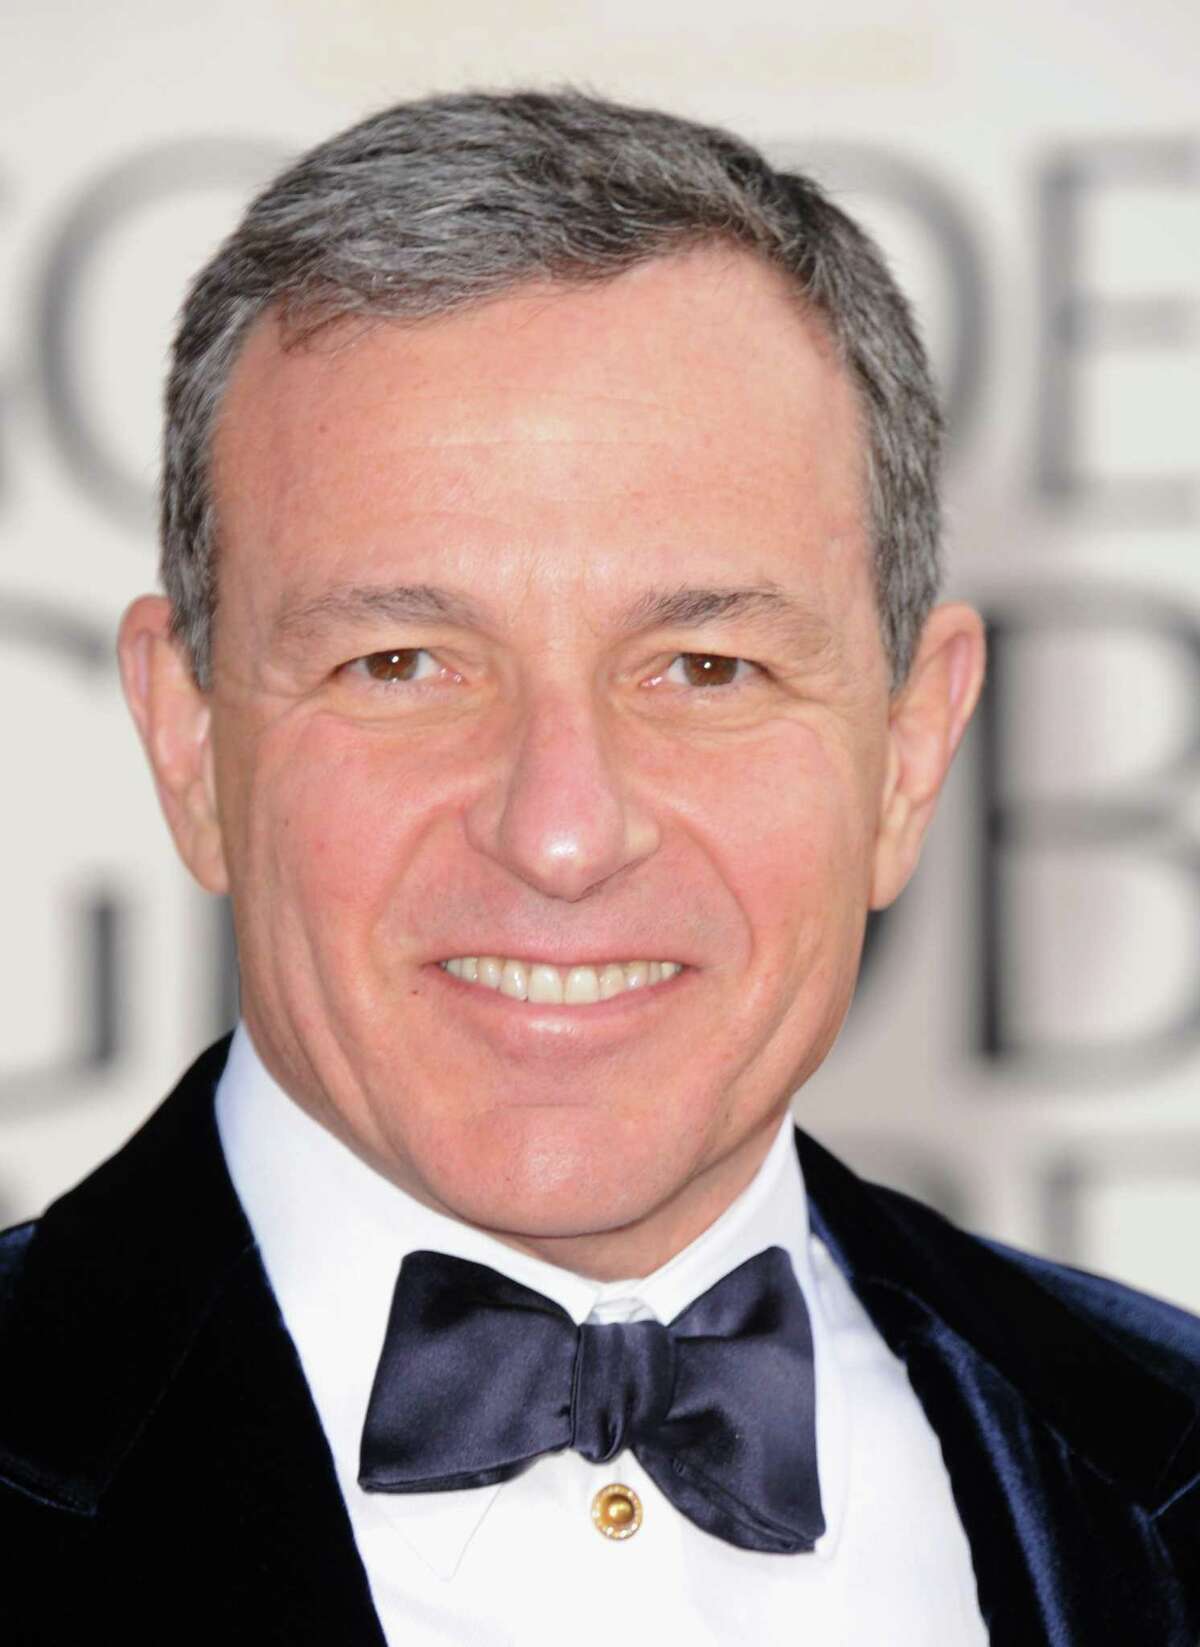 Walt Disney Co. CEO Robert Iger said he plans to stay on a presidential advisory panel after activists at the company’s annual shareholder meeting Wednesday asked him to step down from the position.